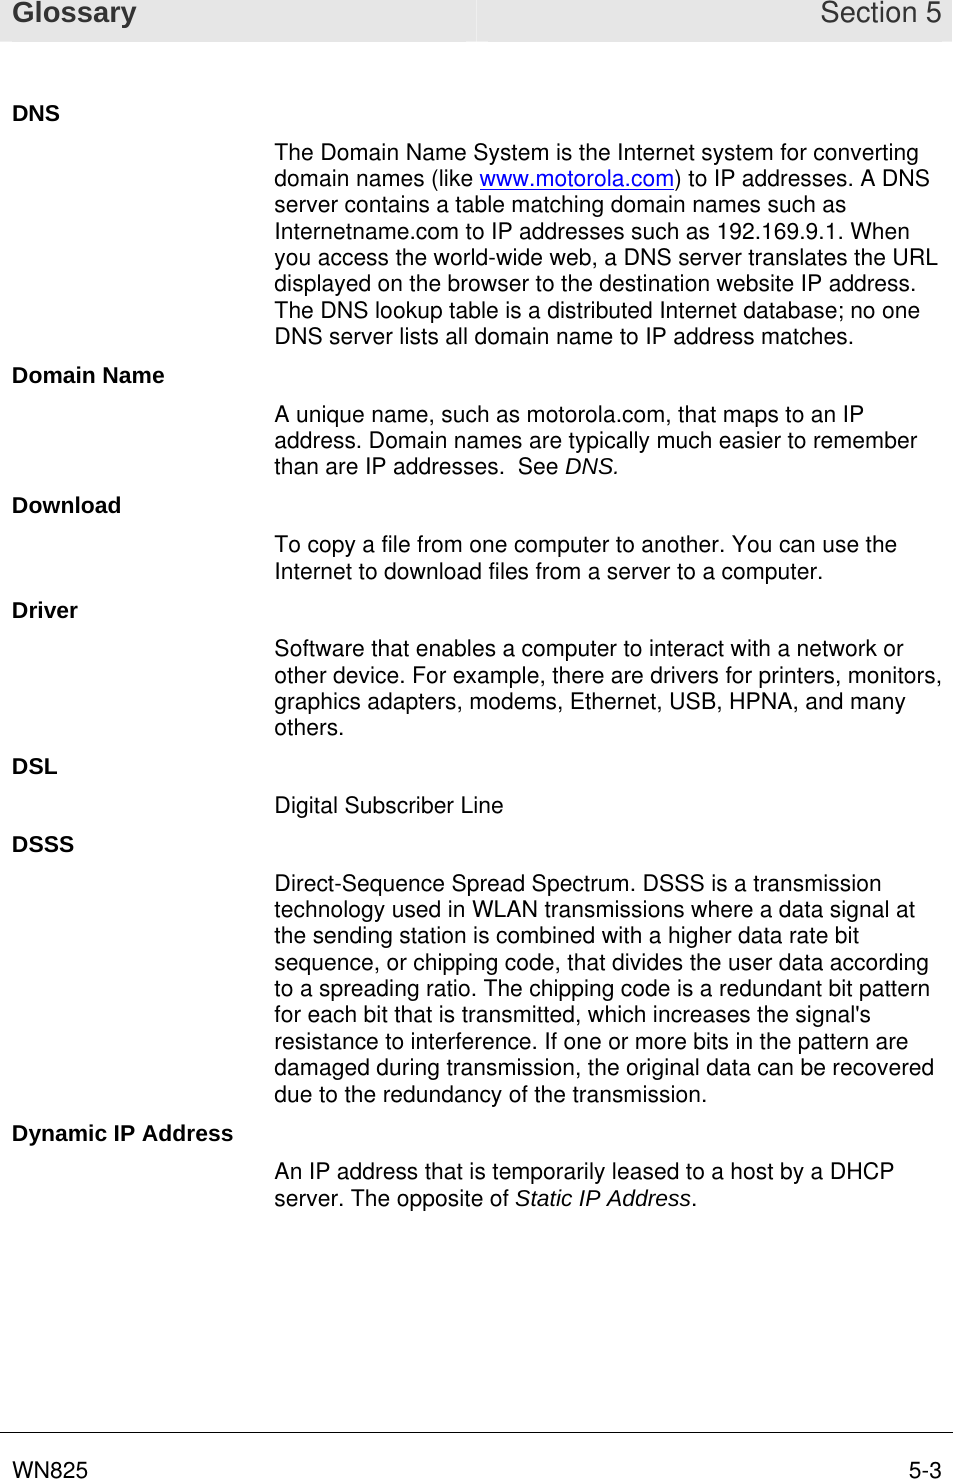 Glossary Section 5 WN825  5-3DNS The Domain Name System is the Internet system for converting domain names (like www.motorola.com) to IP addresses. A DNS server contains a table matching domain names such as Internetname.com to IP addresses such as 192.169.9.1. When you access the world-wide web, a DNS server translates the URL displayed on the browser to the destination website IP address. The DNS lookup table is a distributed Internet database; no one DNS server lists all domain name to IP address matches. Domain Name A unique name, such as motorola.com, that maps to an IP address. Domain names are typically much easier to remember than are IP addresses.  See DNS. Download To copy a file from one computer to another. You can use the Internet to download files from a server to a computer.  Driver Software that enables a computer to interact with a network or other device. For example, there are drivers for printers, monitors, graphics adapters, modems, Ethernet, USB, HPNA, and many others. DSL Digital Subscriber Line DSSS Direct-Sequence Spread Spectrum. DSSS is a transmission technology used in WLAN transmissions where a data signal at the sending station is combined with a higher data rate bit sequence, or chipping code, that divides the user data according to a spreading ratio. The chipping code is a redundant bit pattern for each bit that is transmitted, which increases the signal&apos;s resistance to interference. If one or more bits in the pattern are damaged during transmission, the original data can be recovered due to the redundancy of the transmission.  Dynamic IP Address An IP address that is temporarily leased to a host by a DHCP server. The opposite of Static IP Address.  